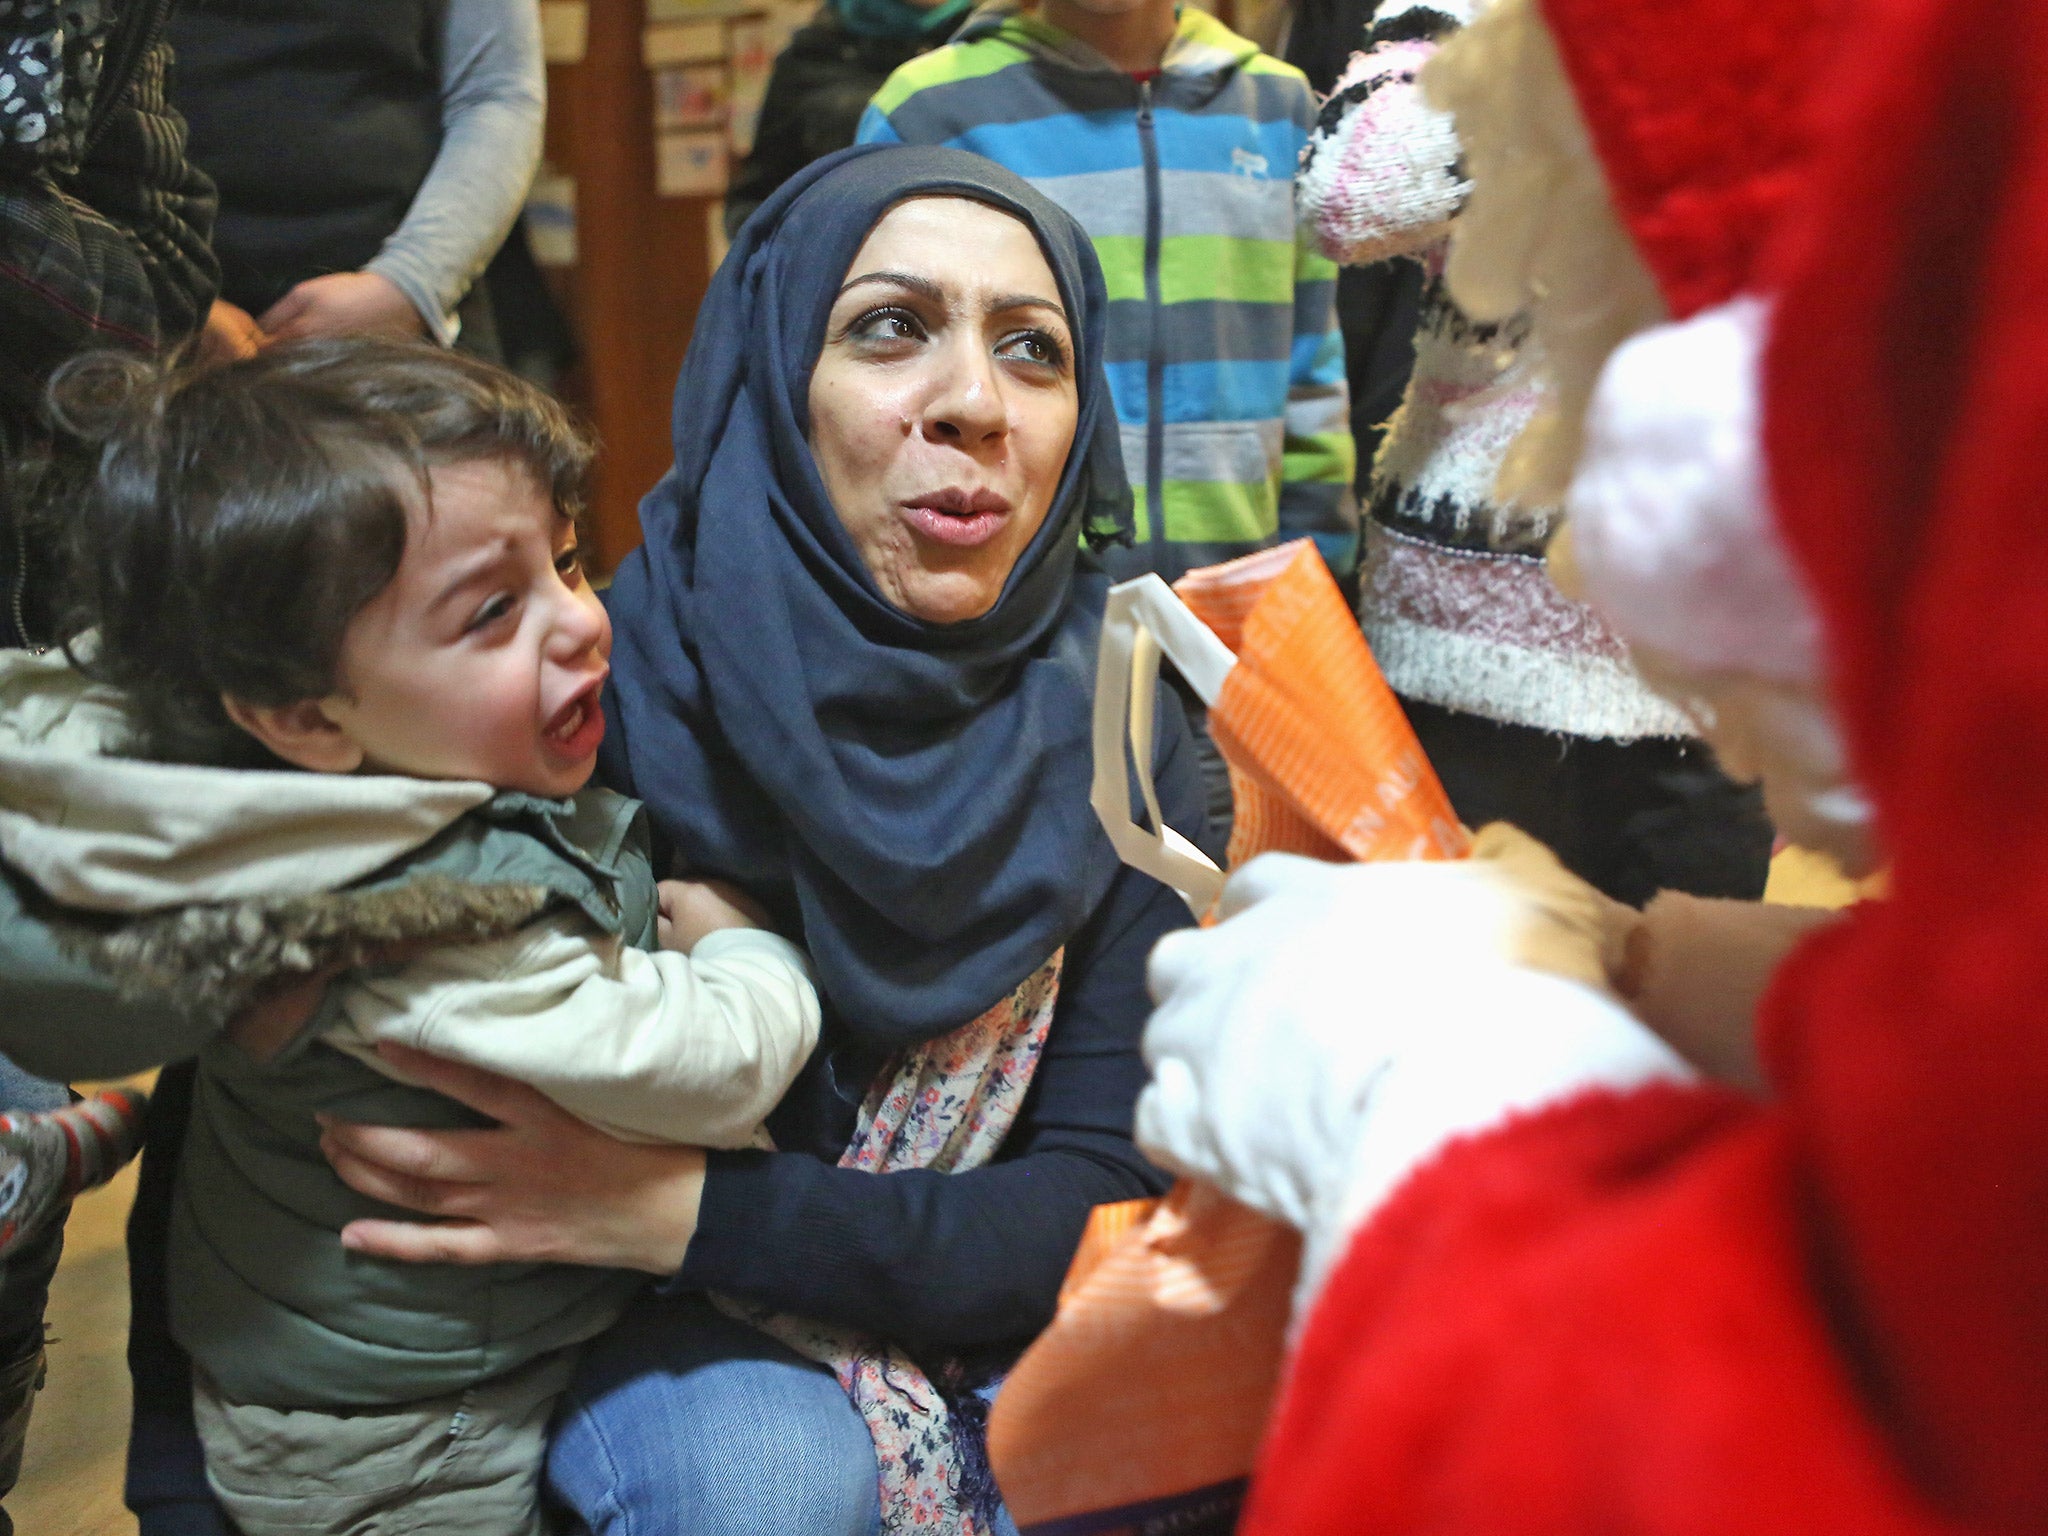 Syrian refugees meet Santa at a migrant shelter in Berlin